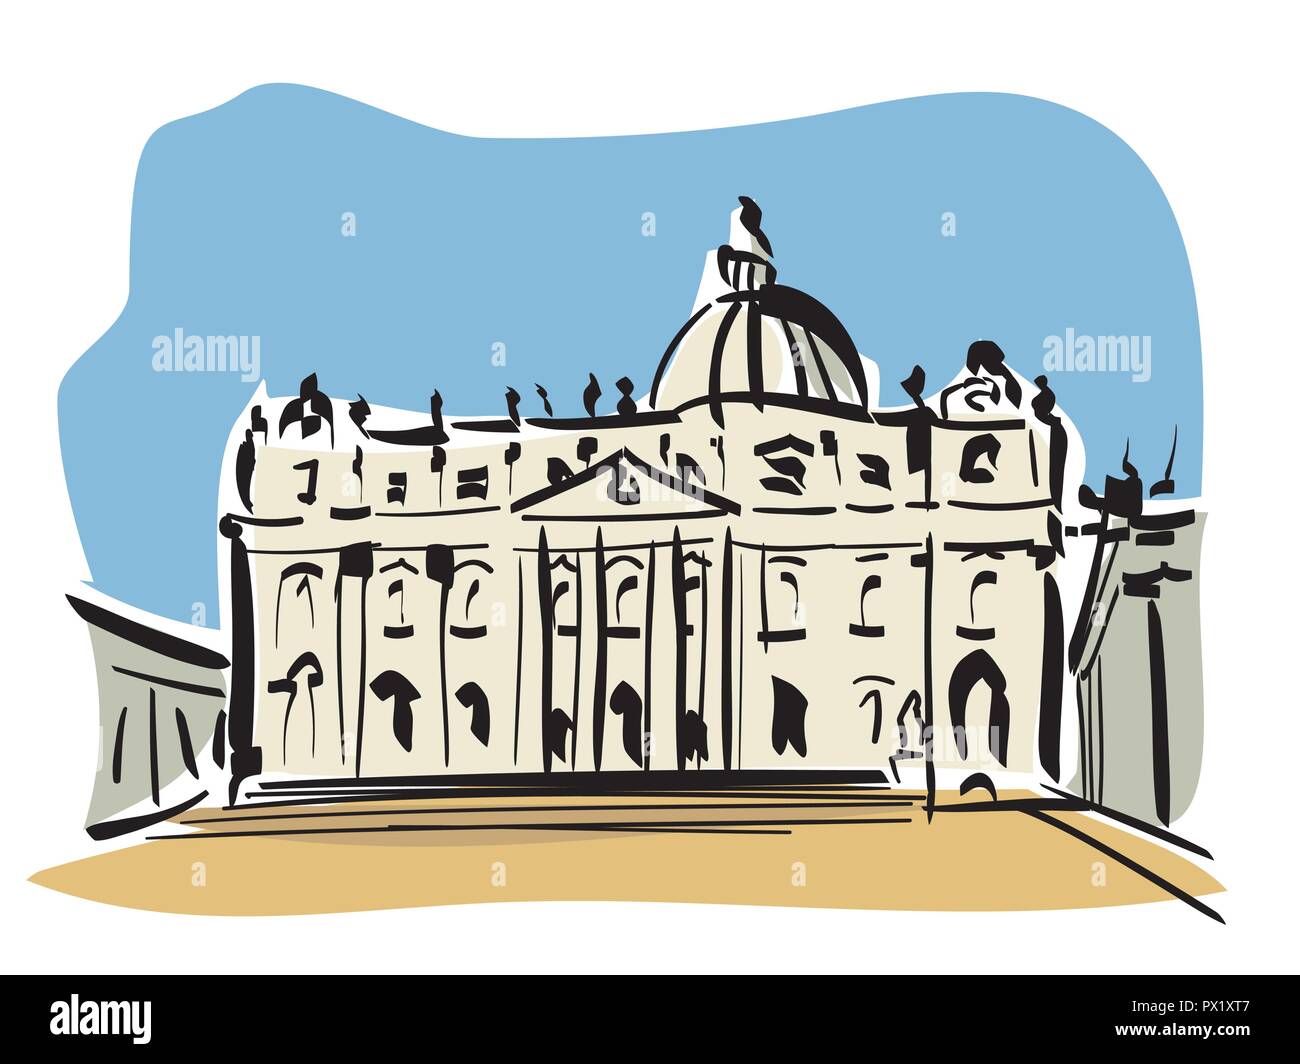 vector illustration of the St. Peter's Basilica,in Rome Stock Vector